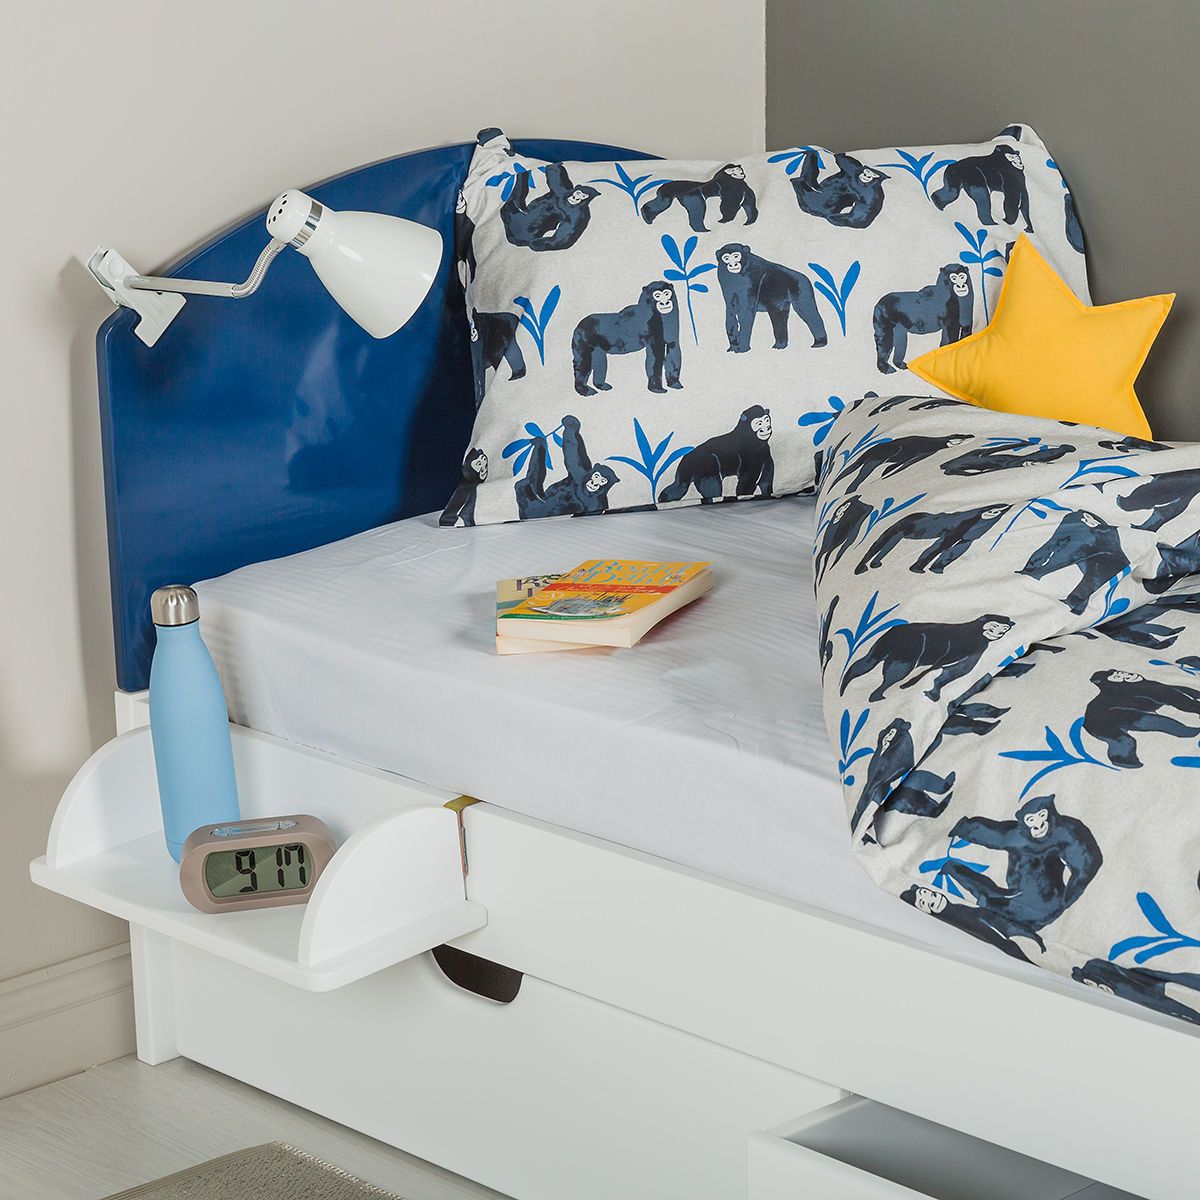 The Colourful Children's Single Bed - Blue